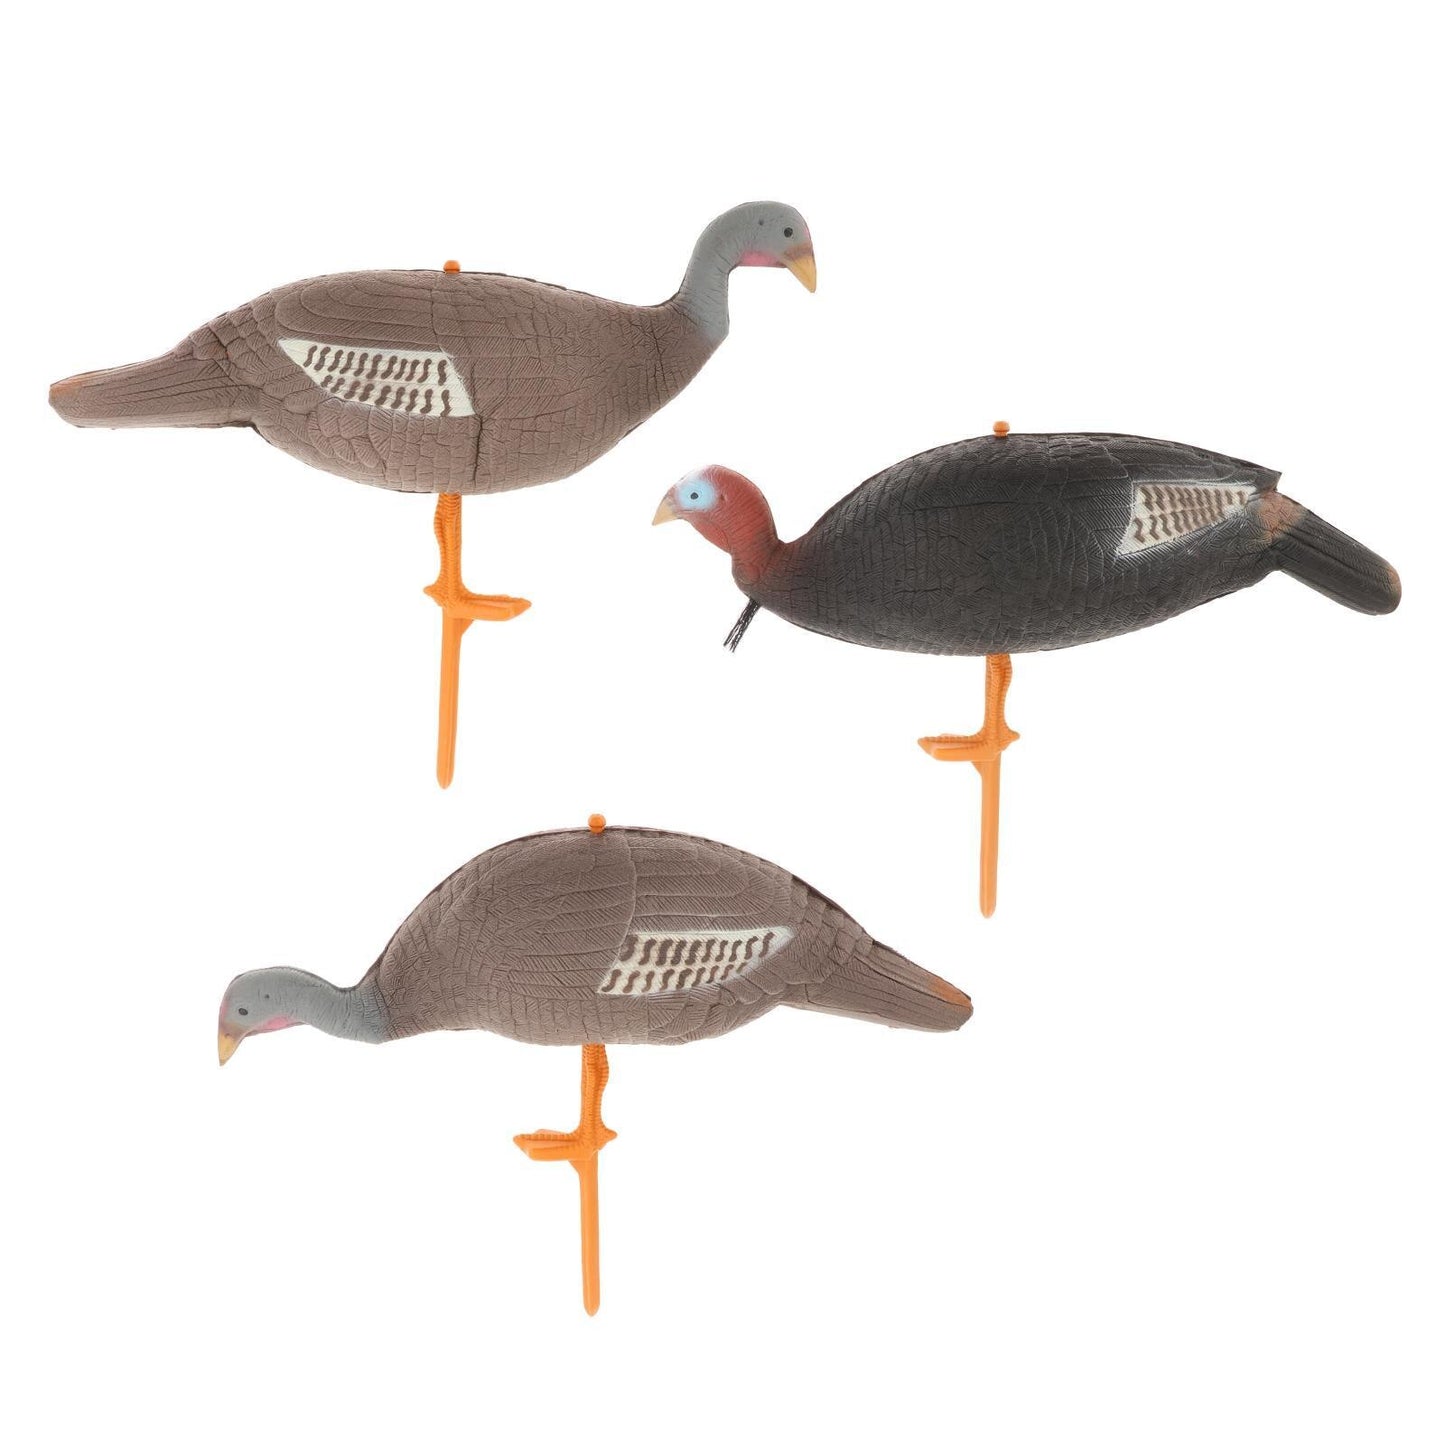 3D  Inflated Turkey Decoy Simulation Turkey Hunting Shooting Animals  Pool Ornaments Waterscape Landscaping